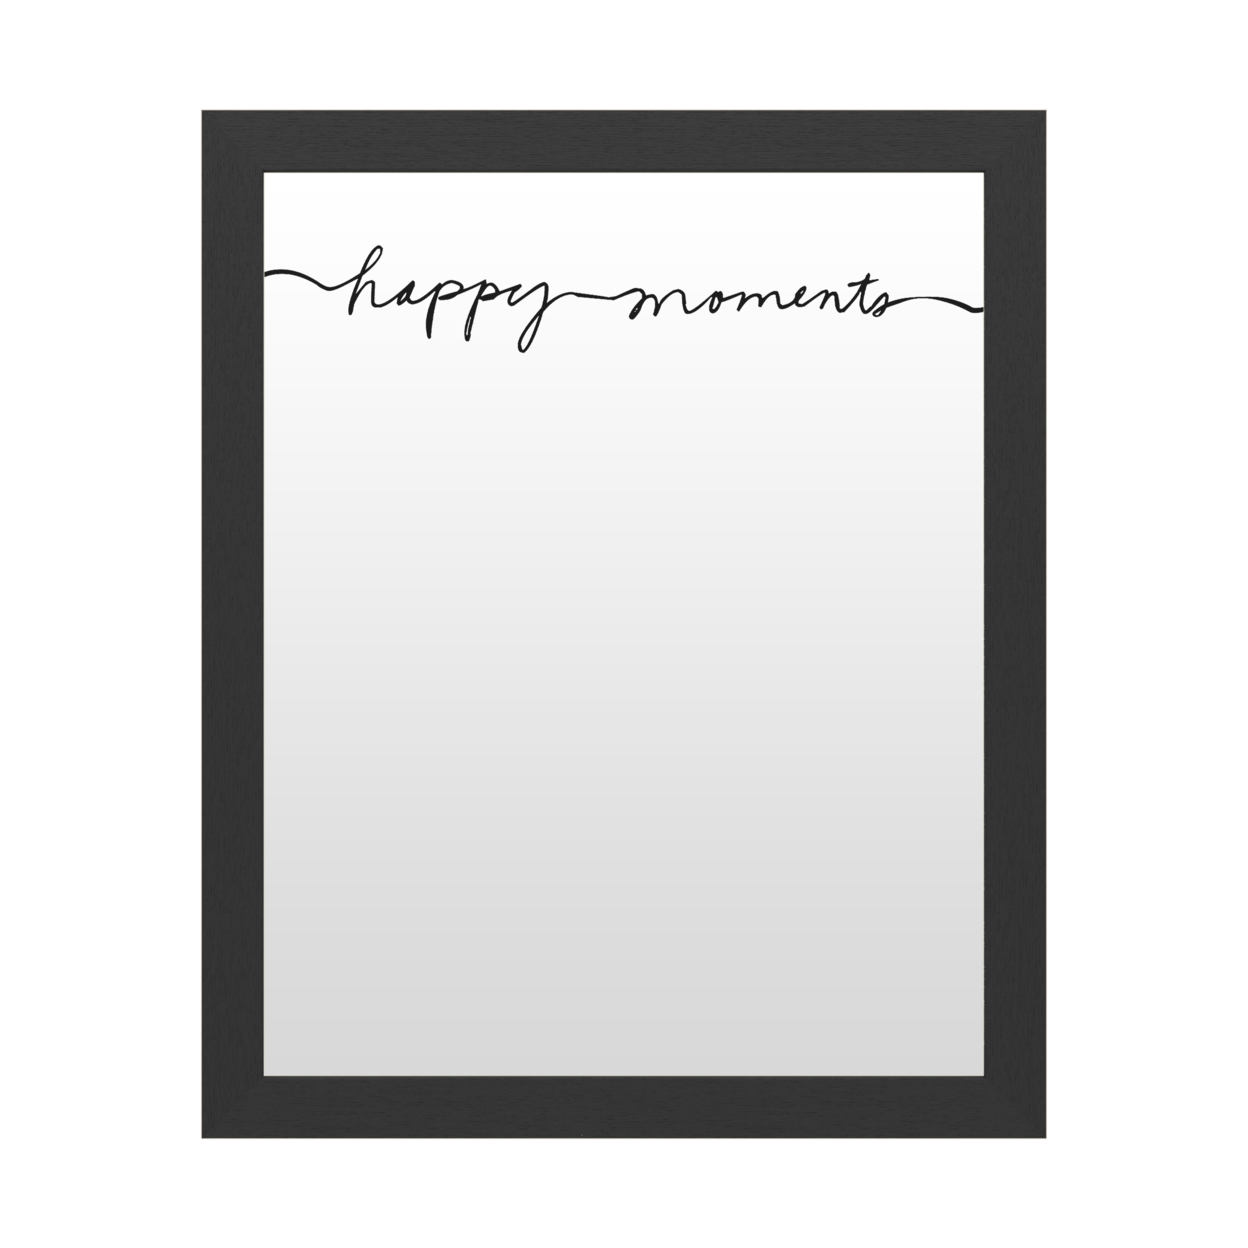 Dry Erase 16 X 20 Marker Board With Printed Artwork - Design Fabrikken Happy Moments Fabrikken White Board - Ready To Hang